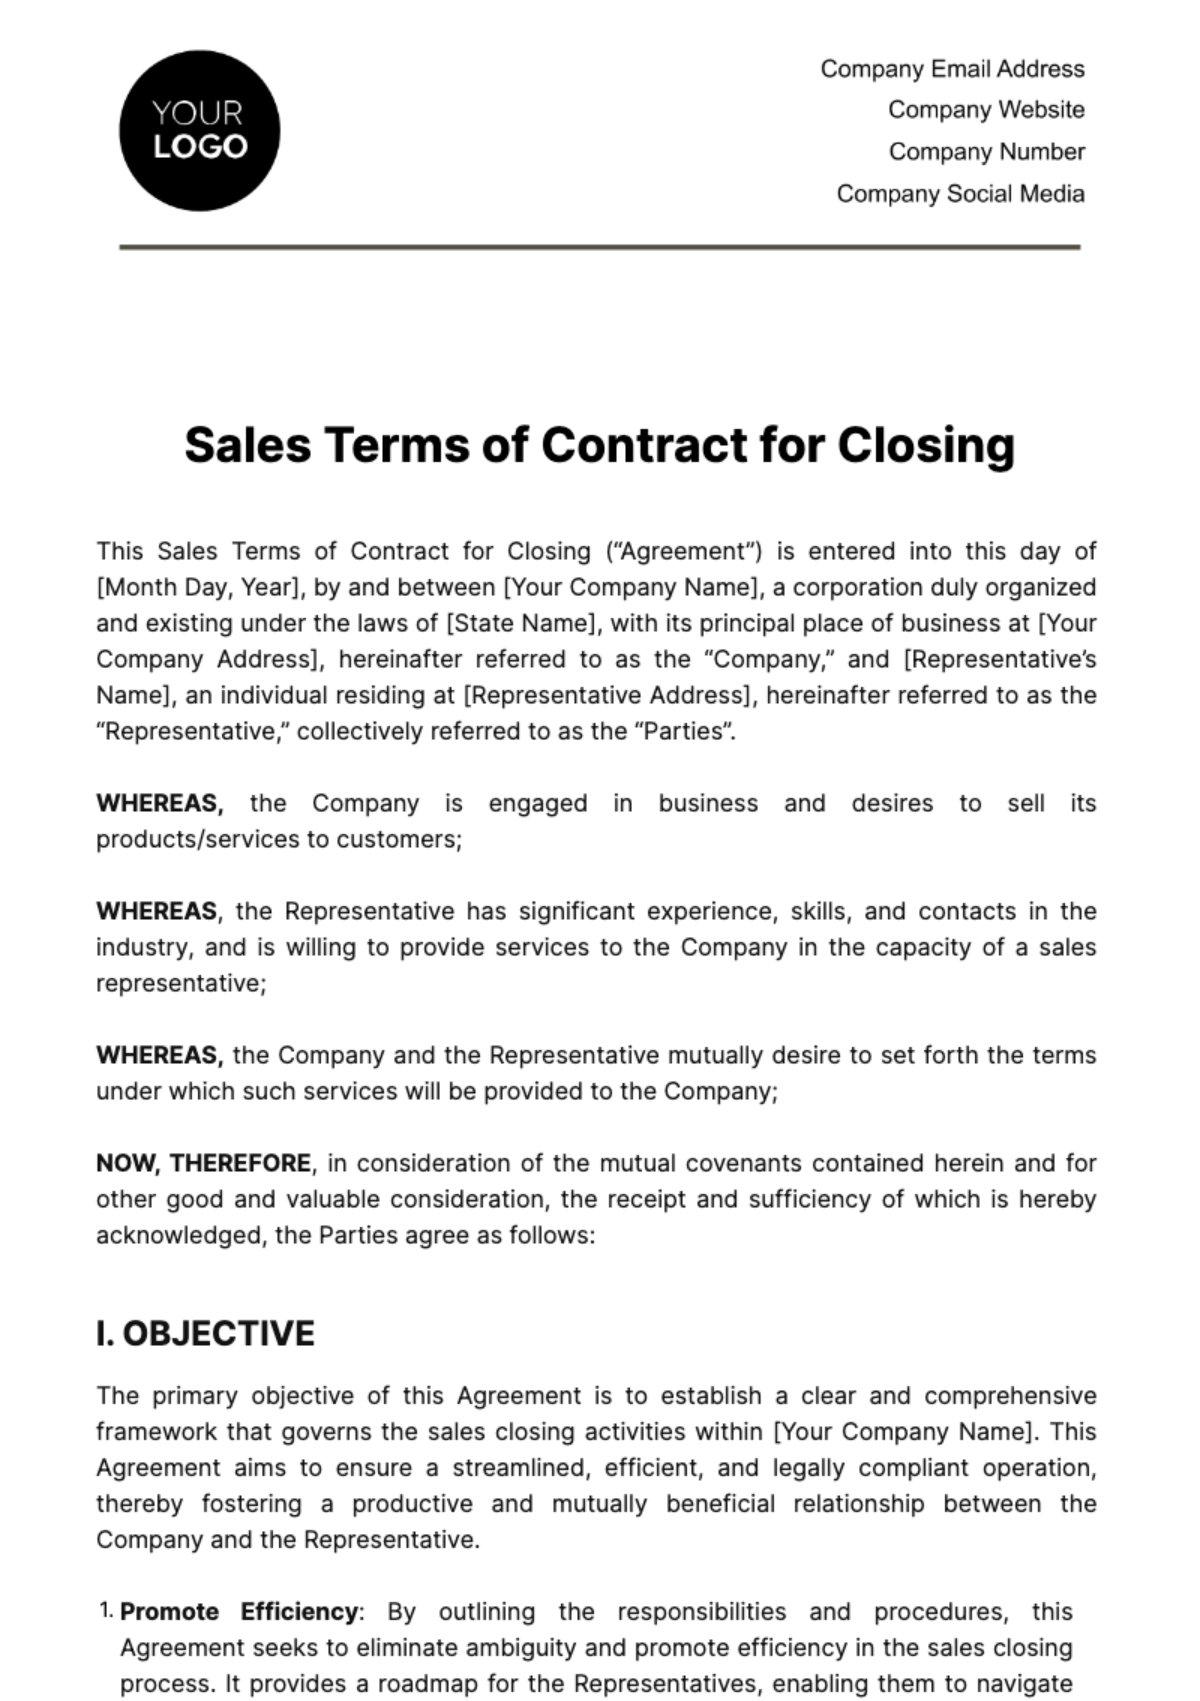 Sales Terms of Contract for Closing Template